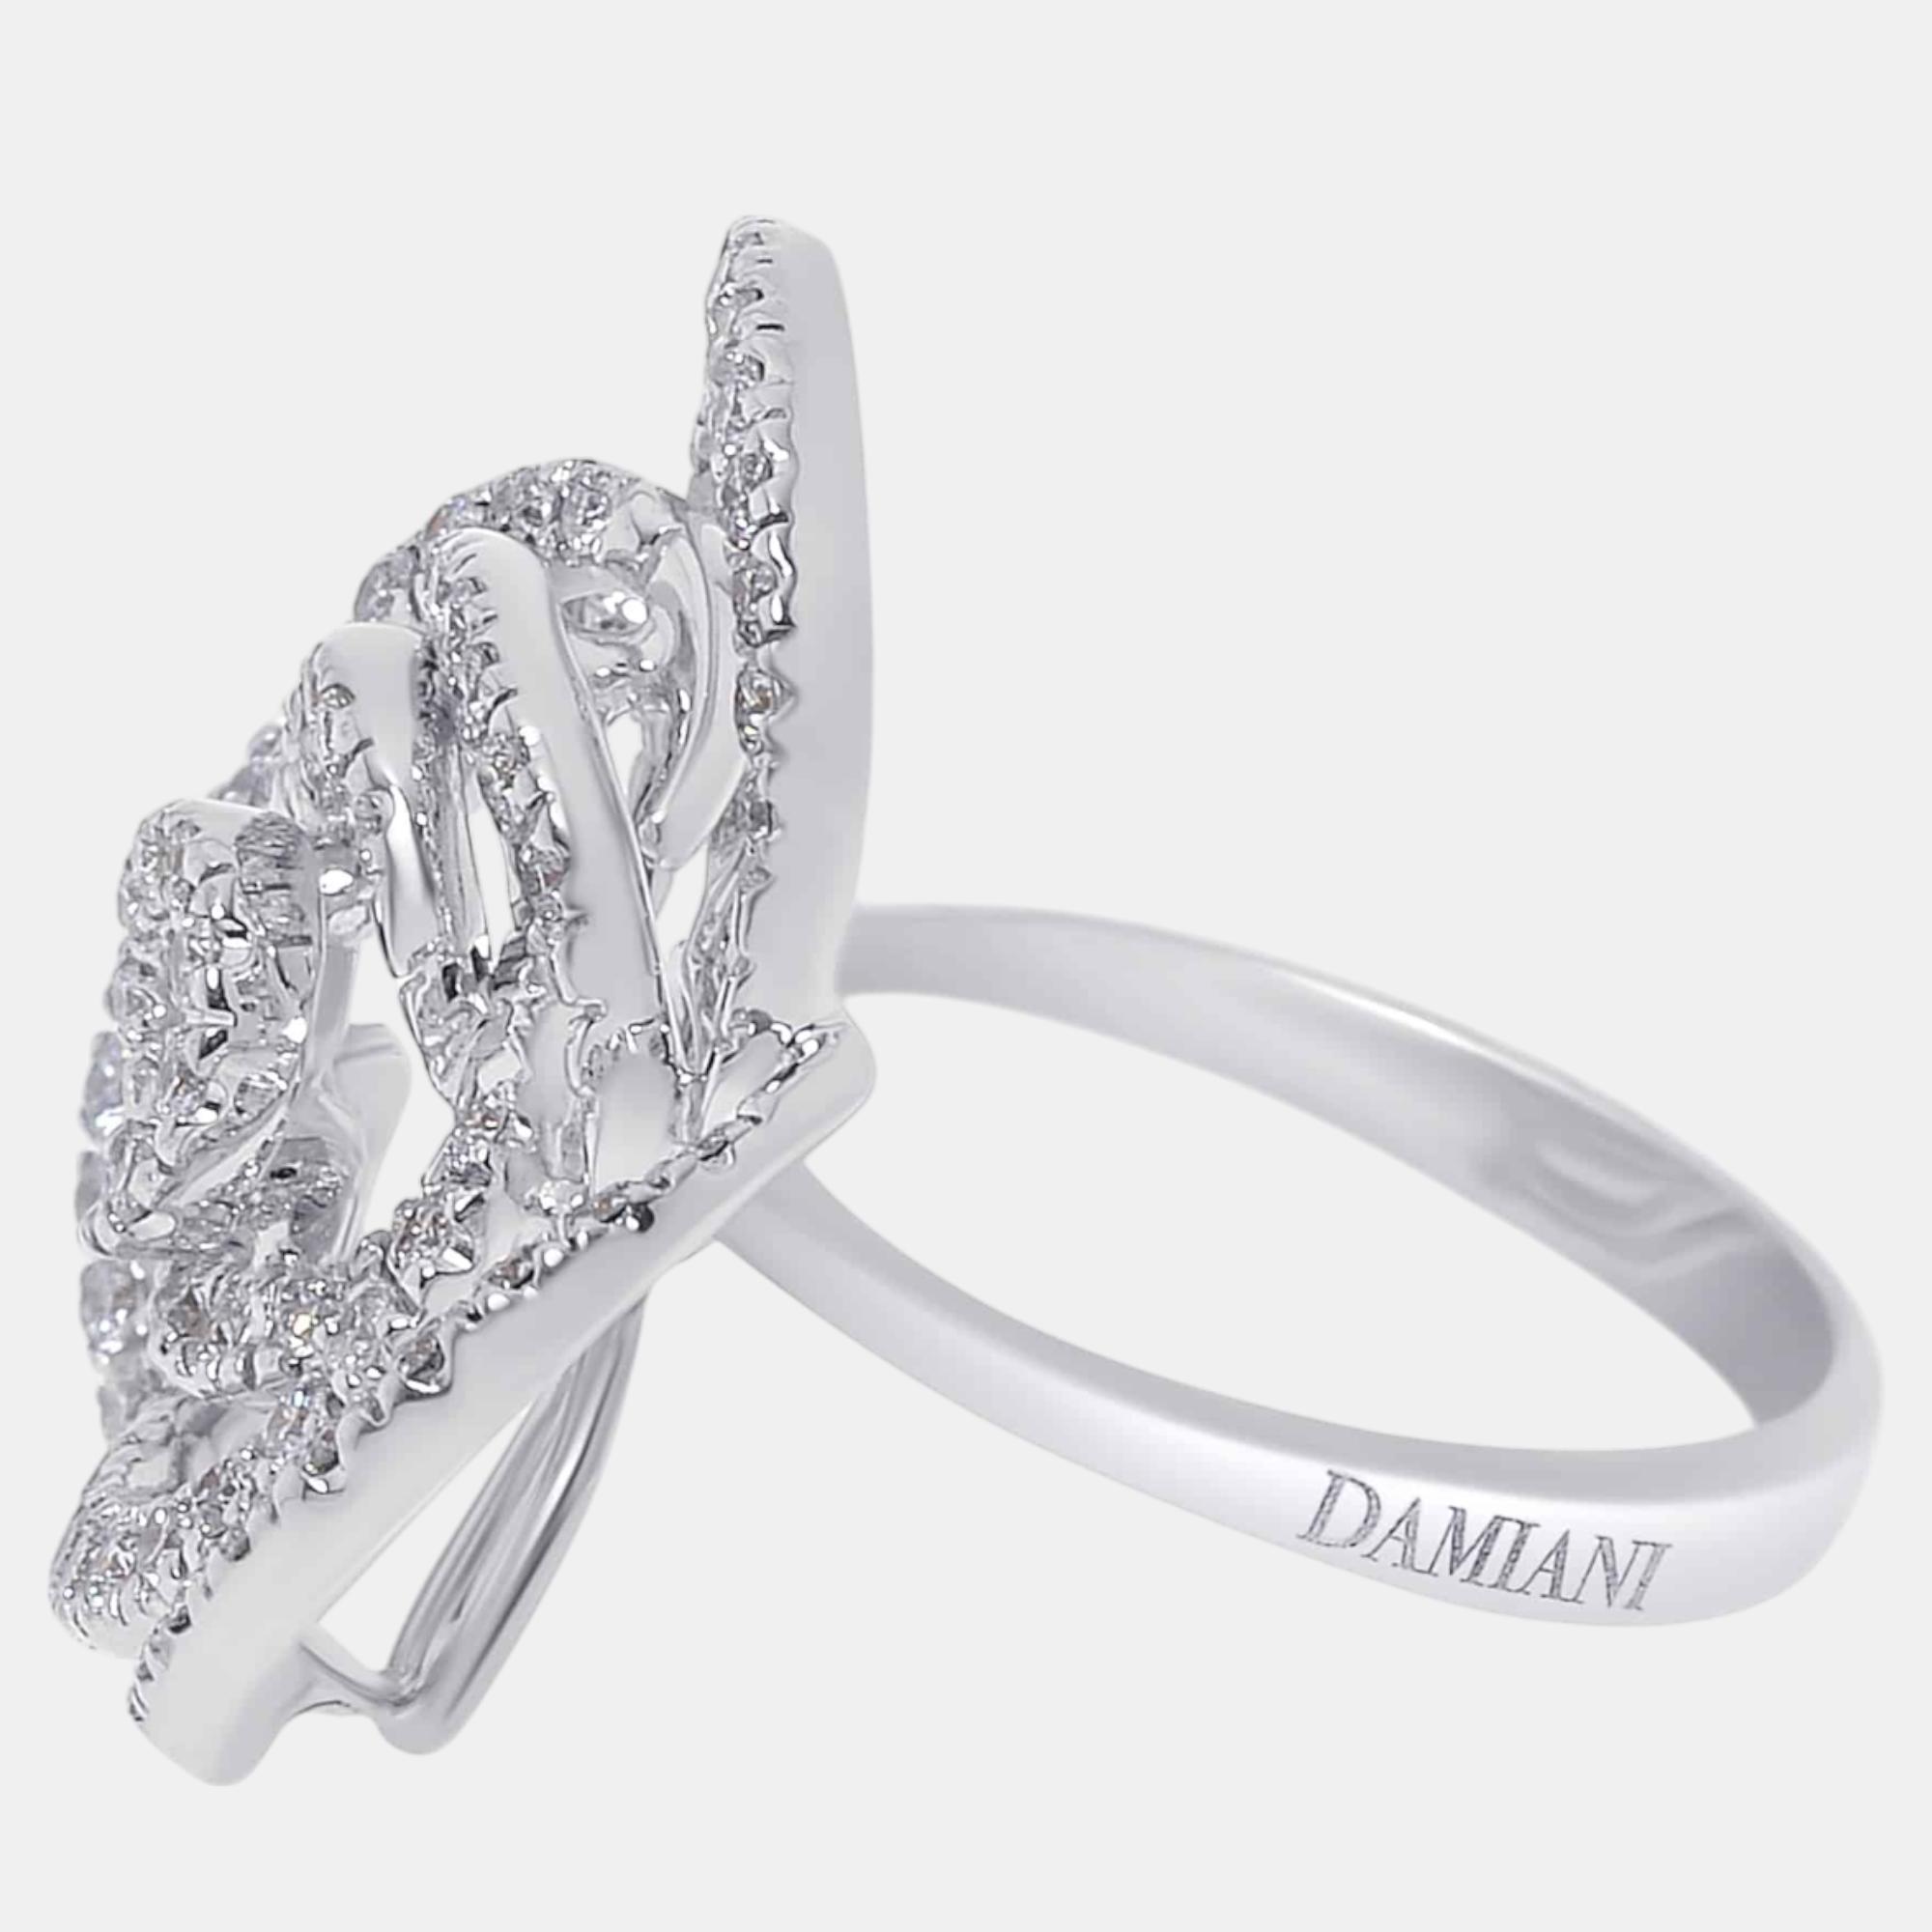 Pre-owned Damiani 18k White Gold And Diamond 0.82ct. Tw. Flower Statement Ring Sz. 5